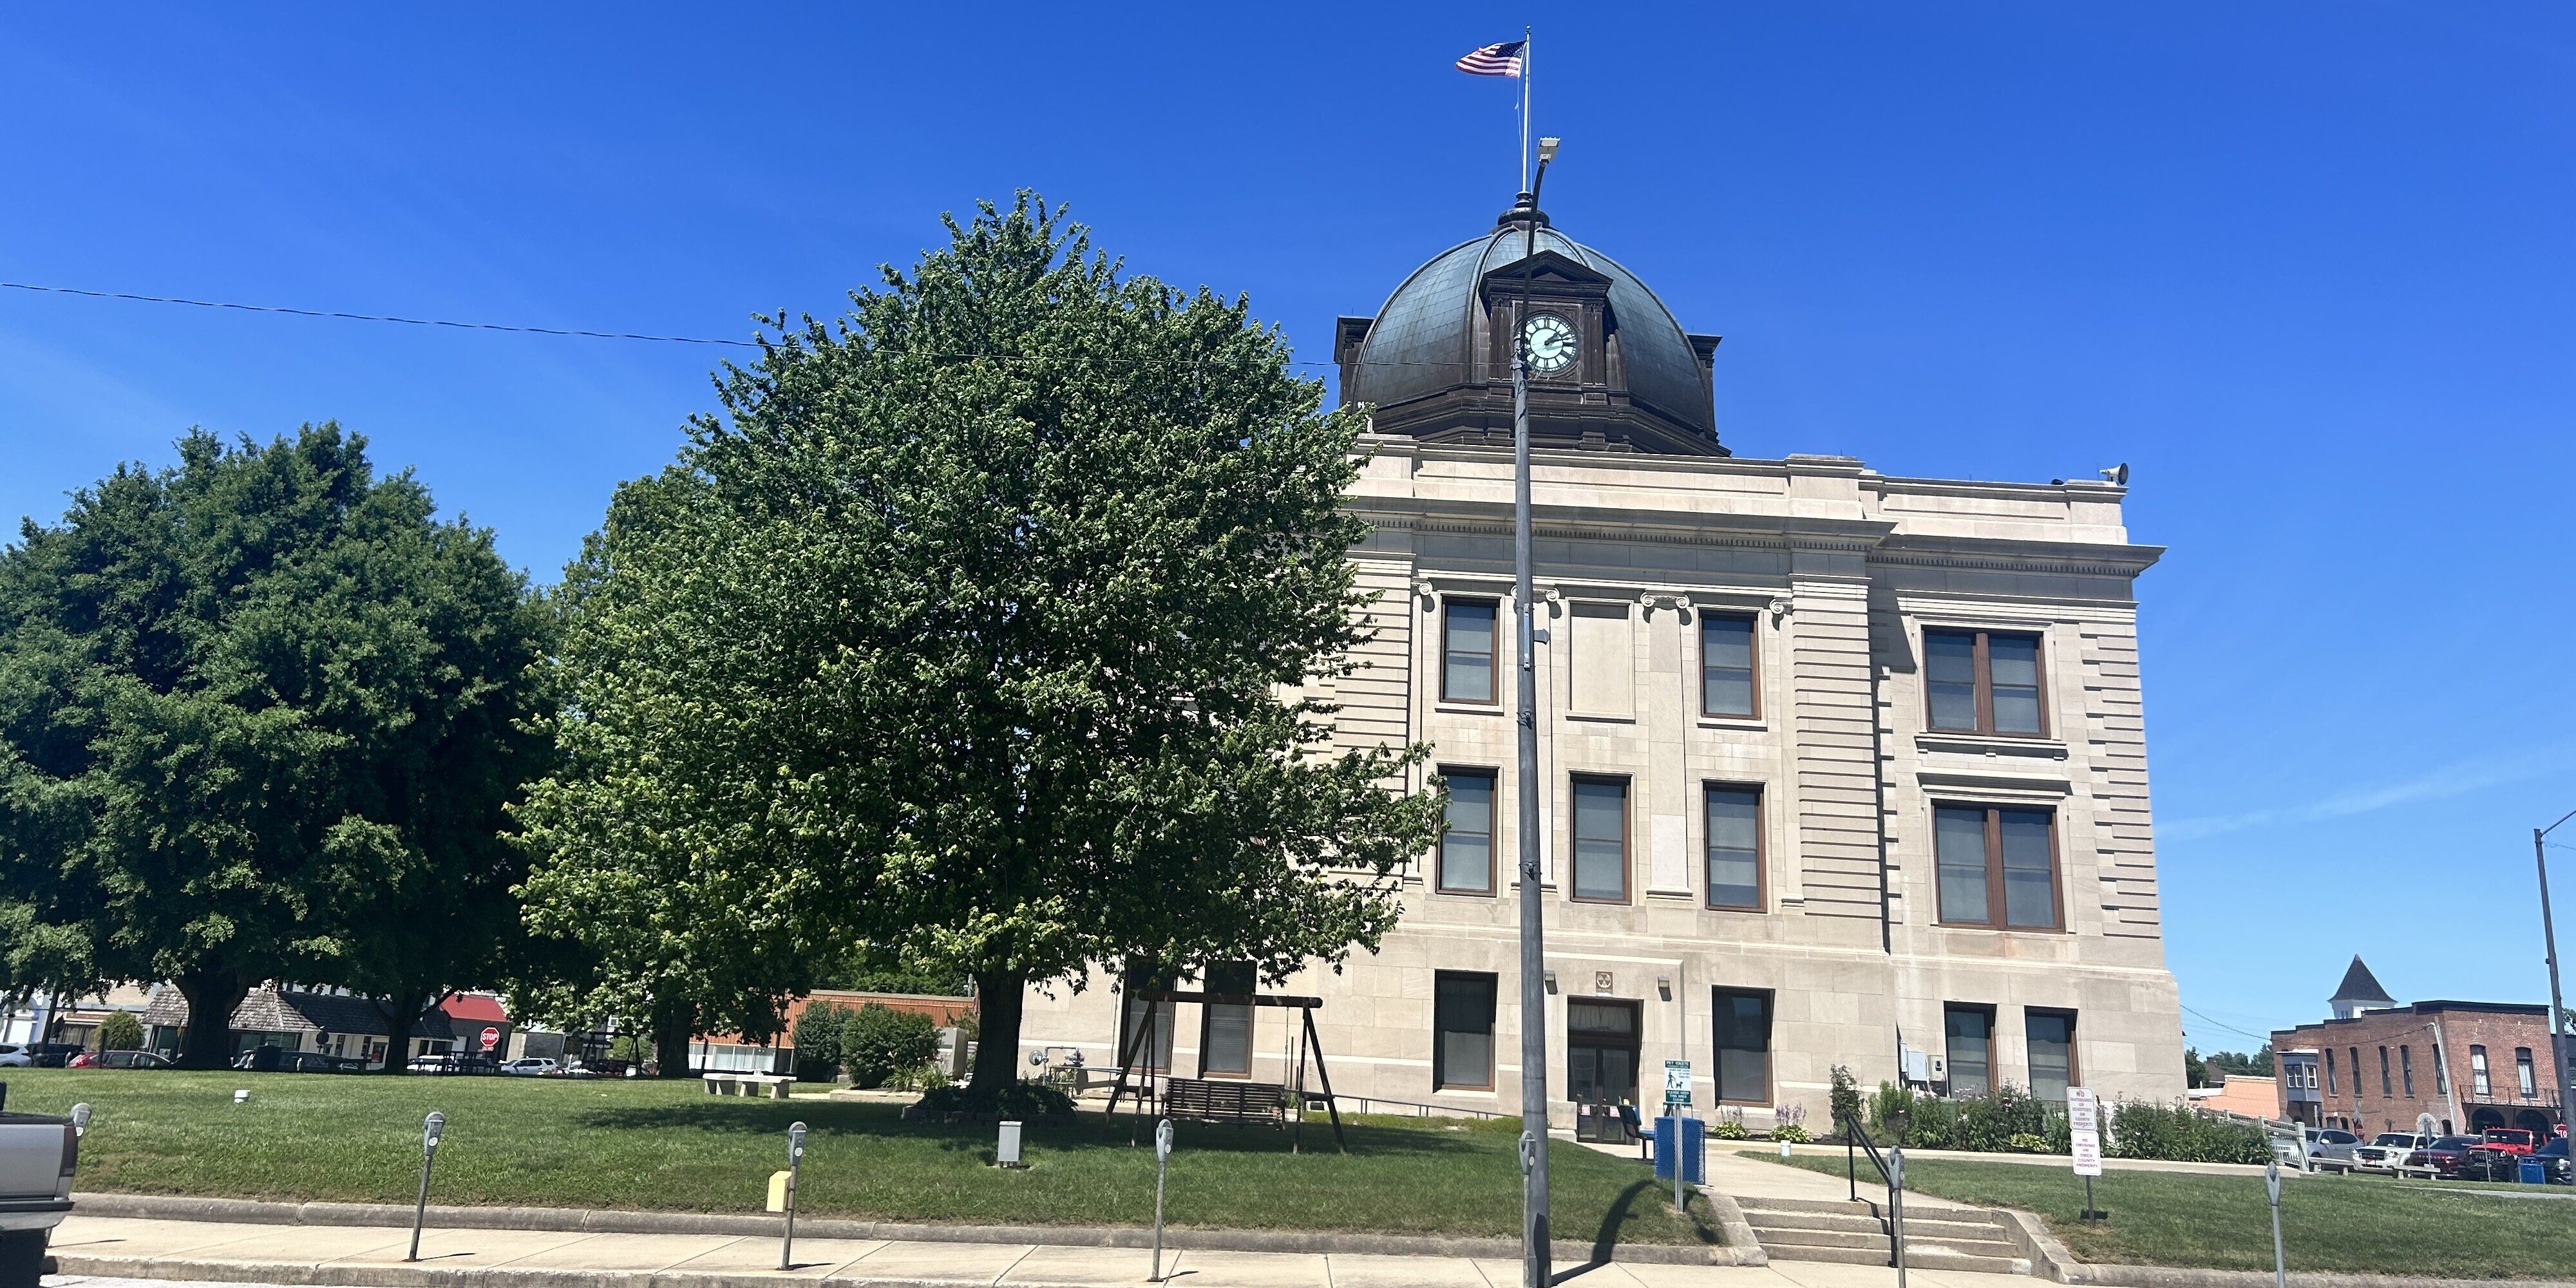 Owen County courthouse on a sunny day with a green tree out front